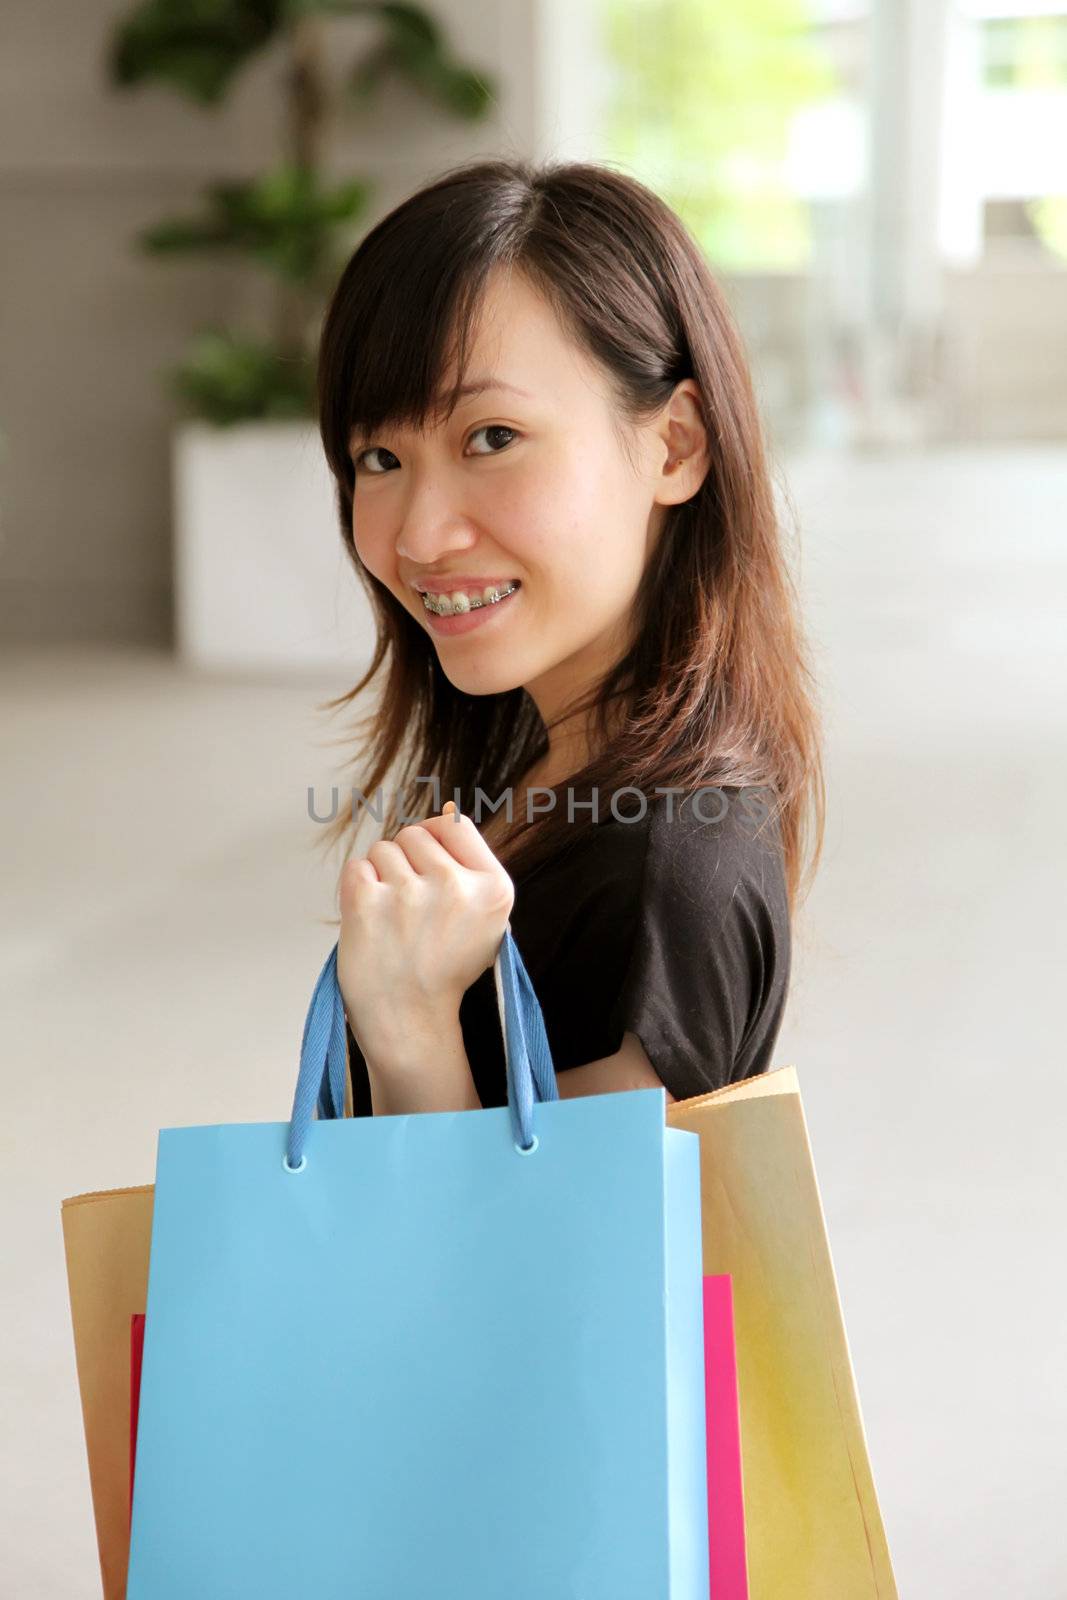 Asian Teenager Female With Shopping Bags in Mall